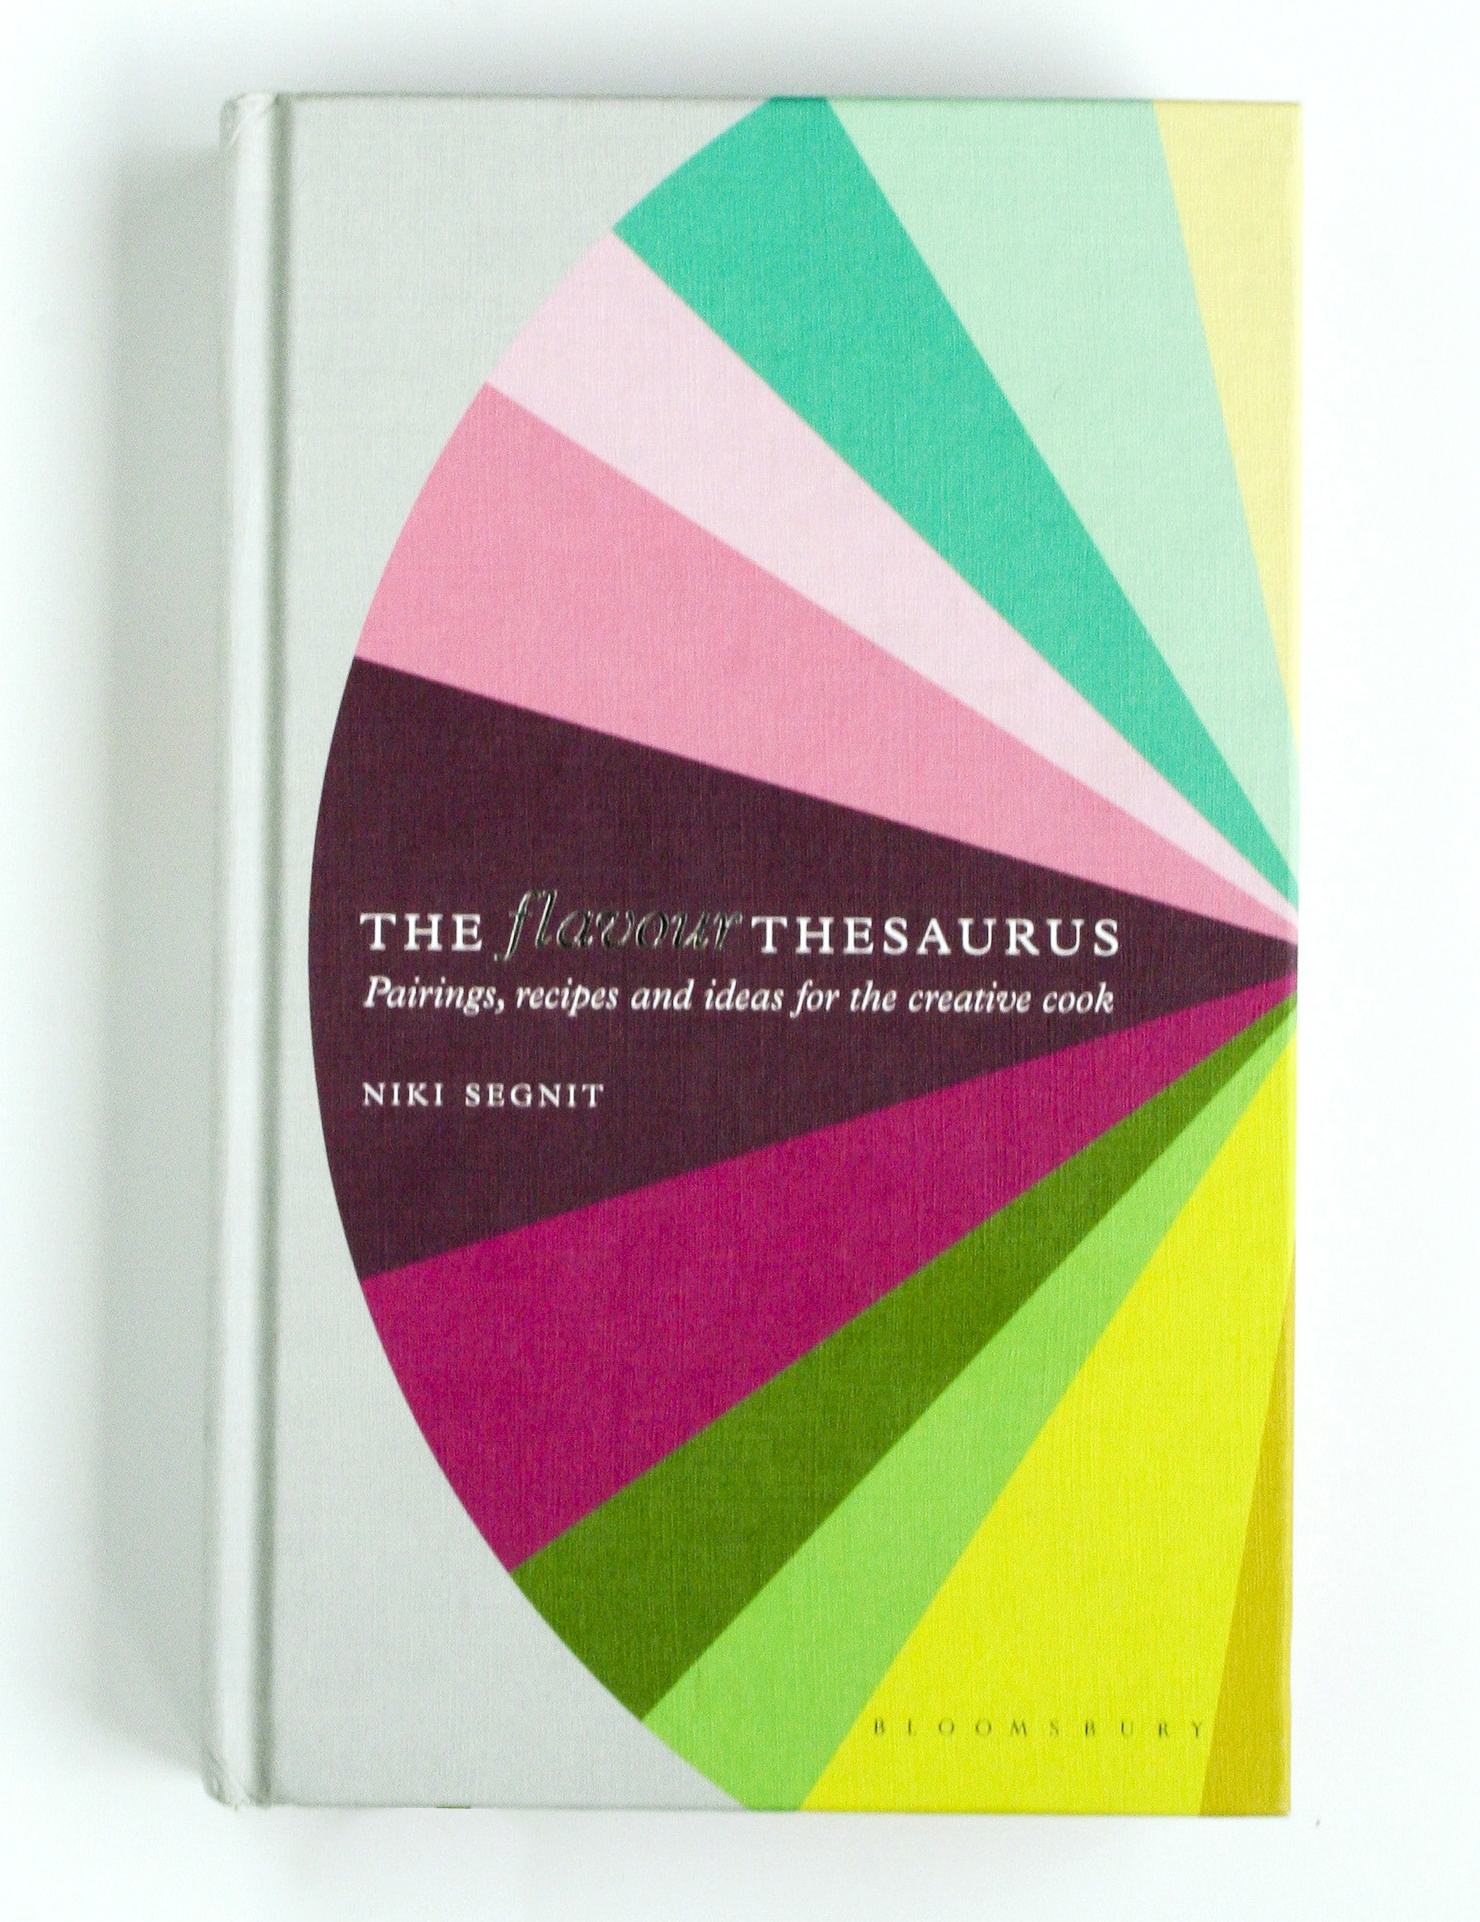 the flavor thesaurus by niki segnit